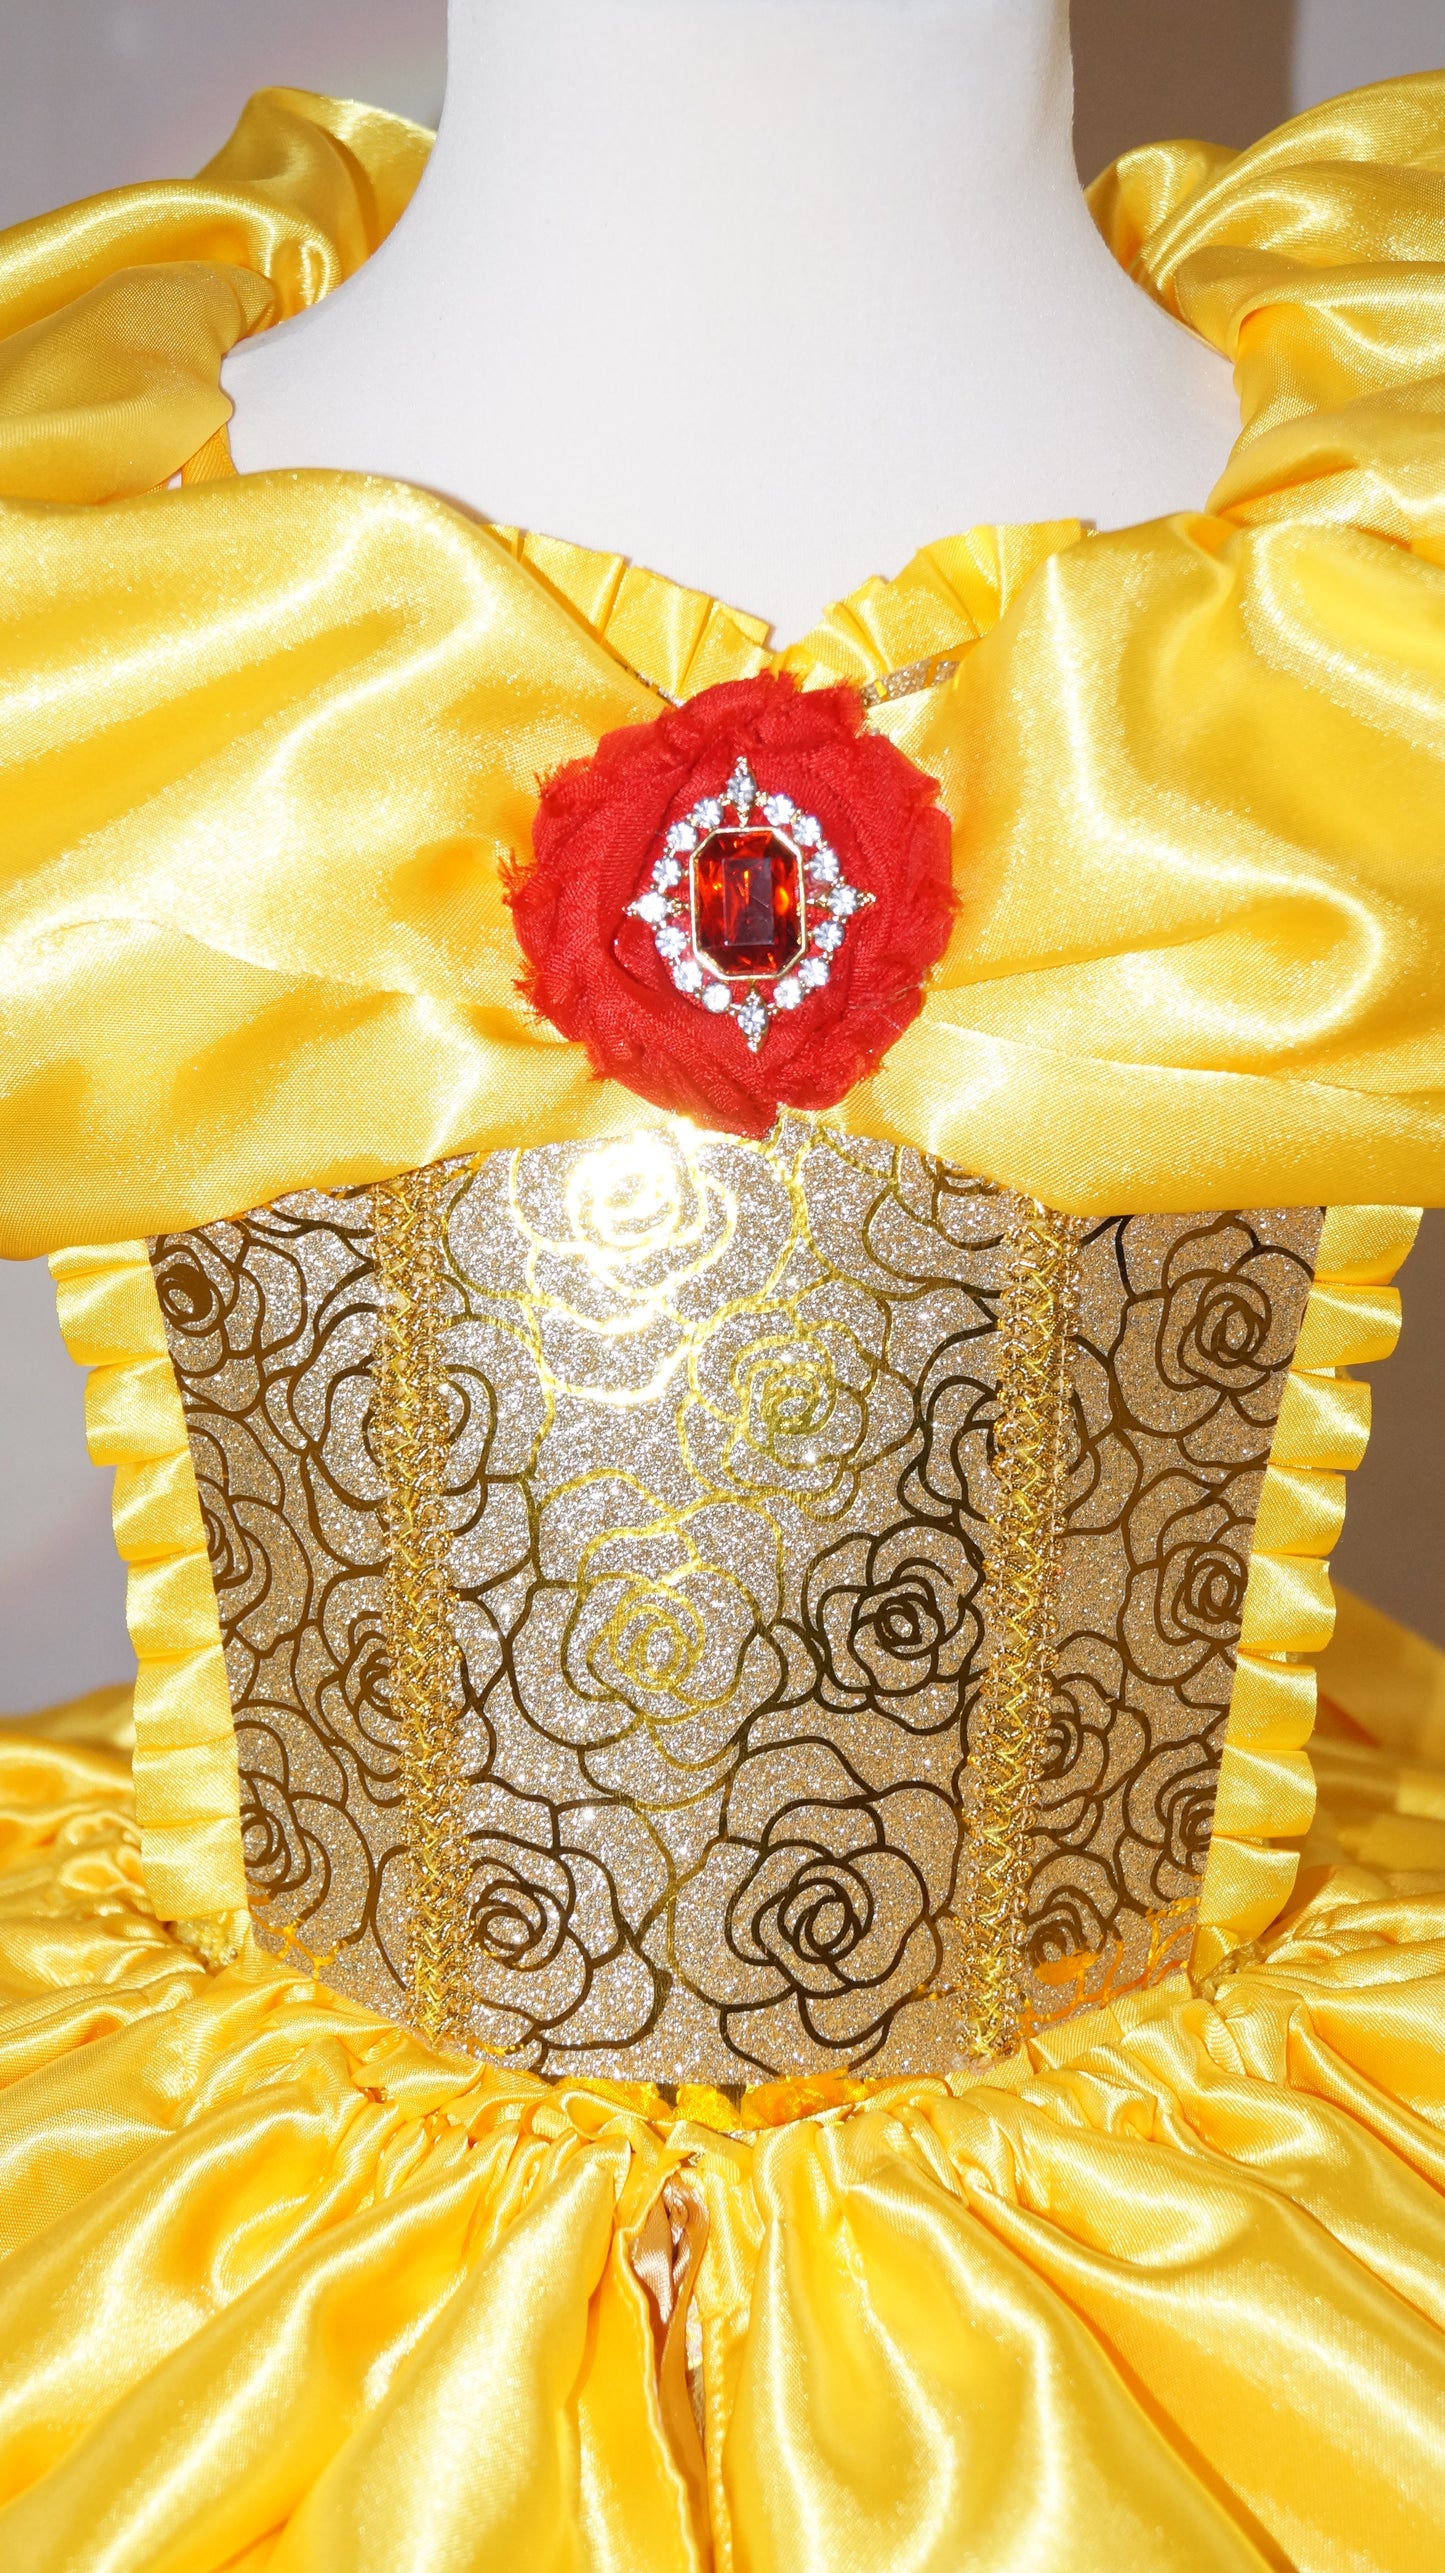 Disney Princess Deluxe Belle Beauty and the Beast Red Rose Tutu Dress